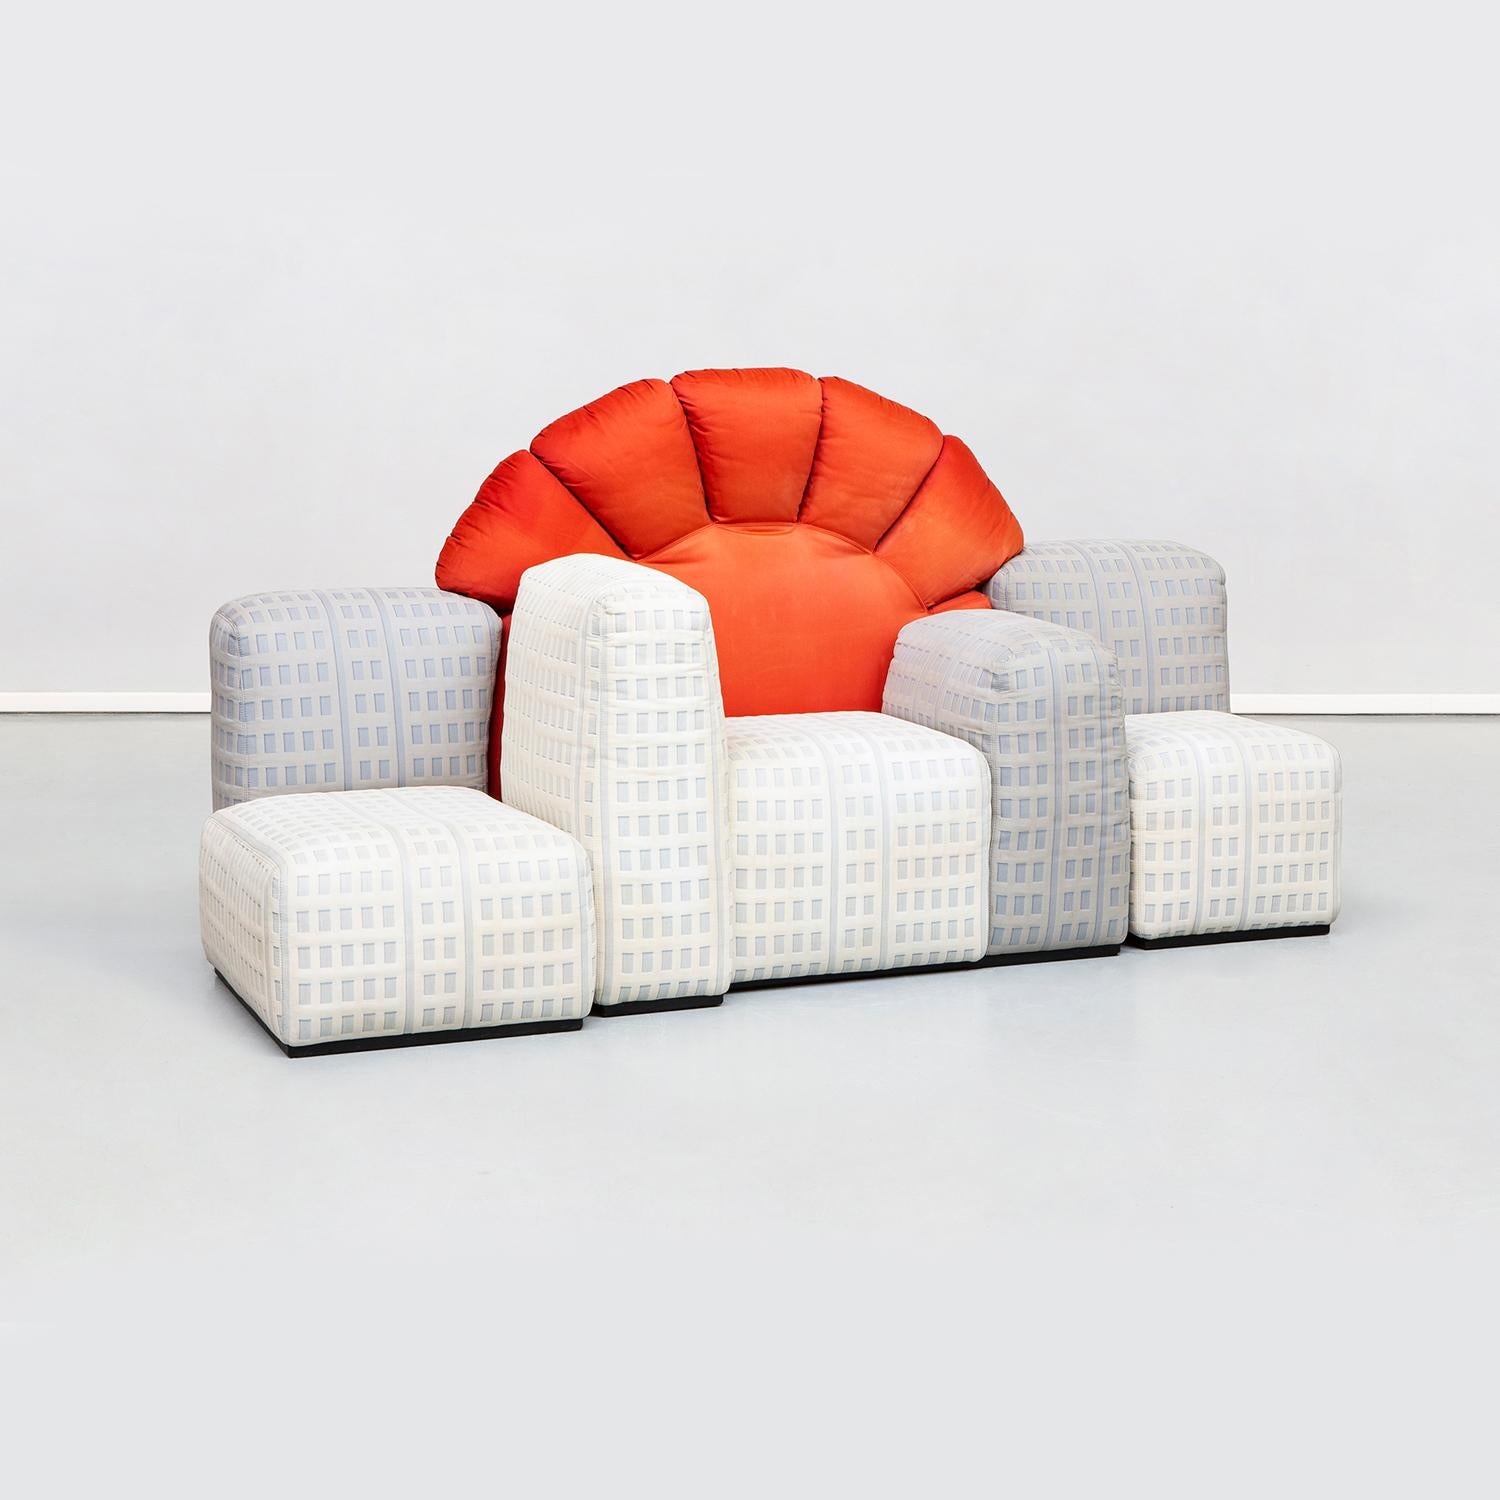 Modular sofa model Tramonto a New York, made up of eight pieces between skyscrapers and sun. The padded skyscrapers act as seats and armrests and backrests and are covered in a fabric with a relief texture, which combines light with dark, recreating